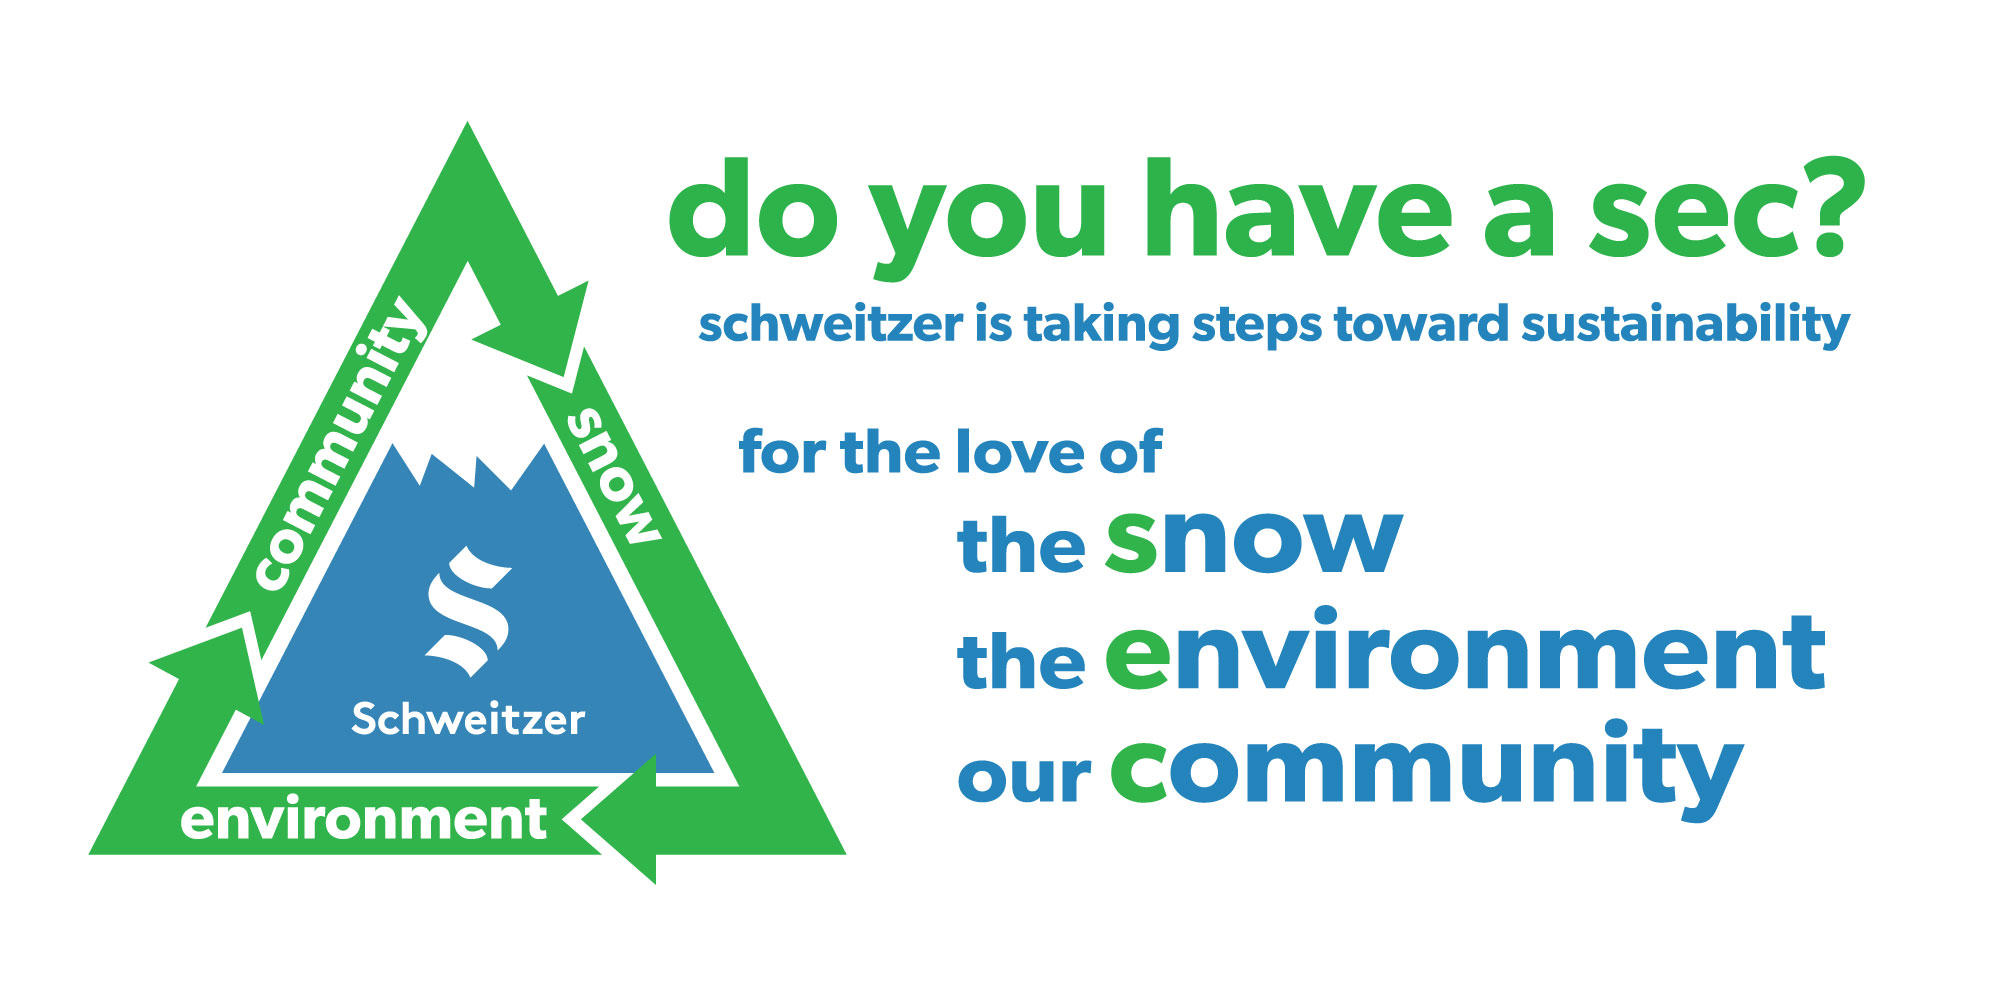 Logo: Do you have a sec? for the love of snow, the environment, for our community. Schweitzer taking steps toward sustainability. 